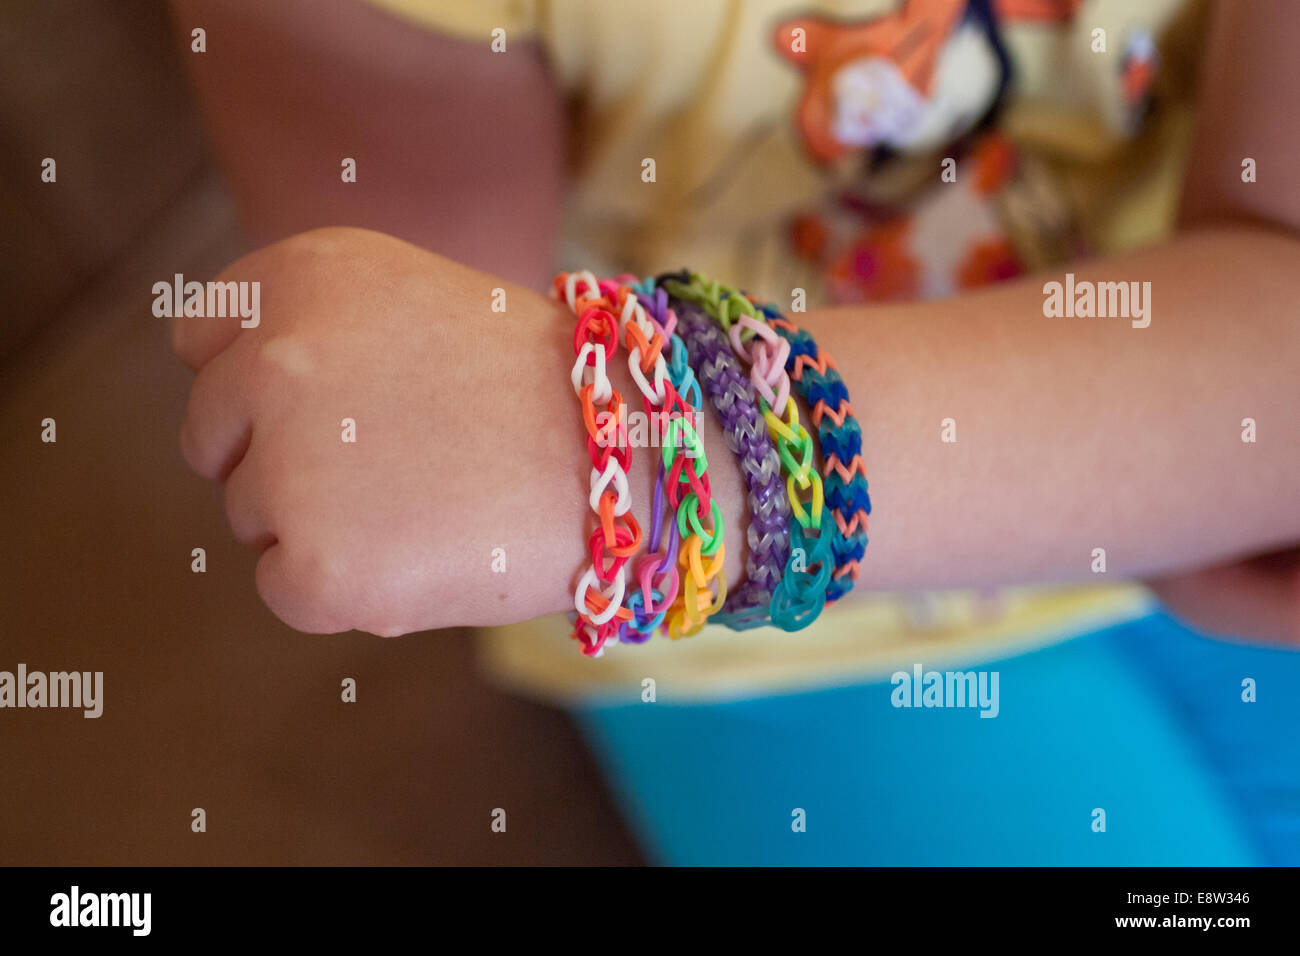 A little girl shows her Rainbow Loom bracelets. Rainbow Loom is a toy loom used to weave rubber bands into bracelets and charms. Stock Photo